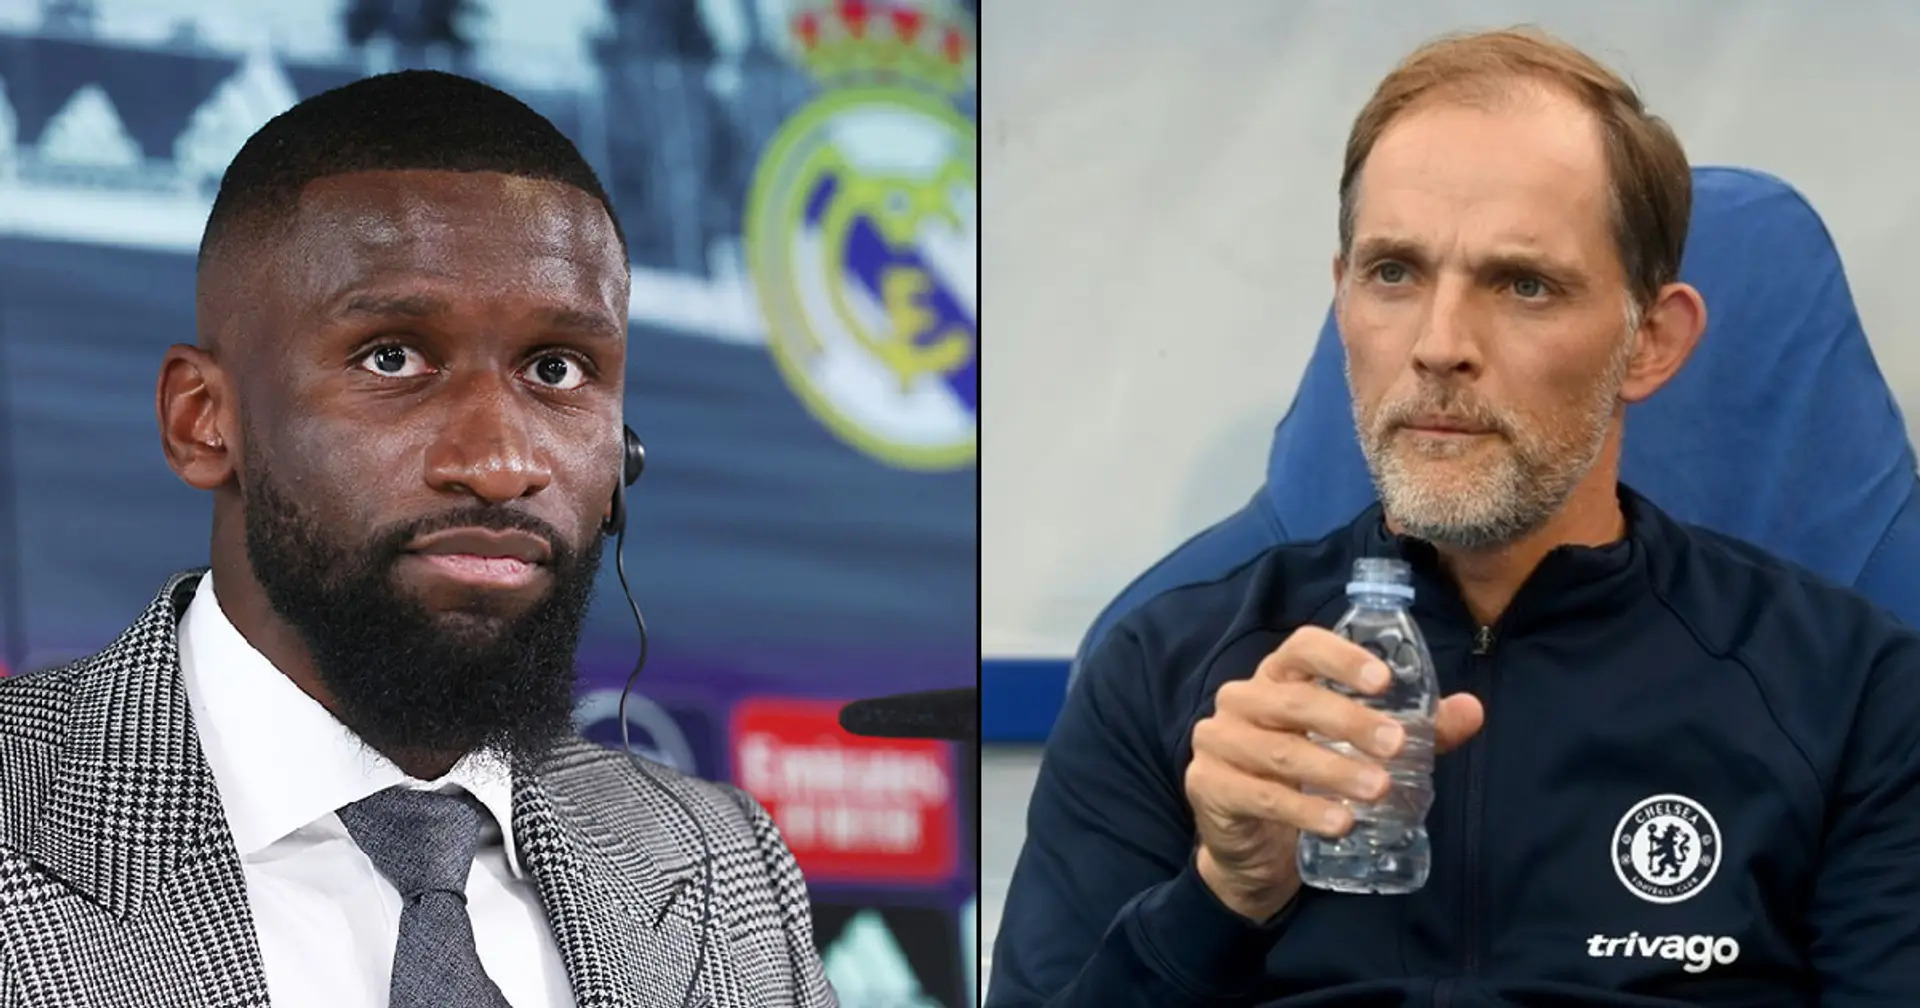 'Sad day ... he made the impossible possible': Rudiger reacts to Tuchel sacking